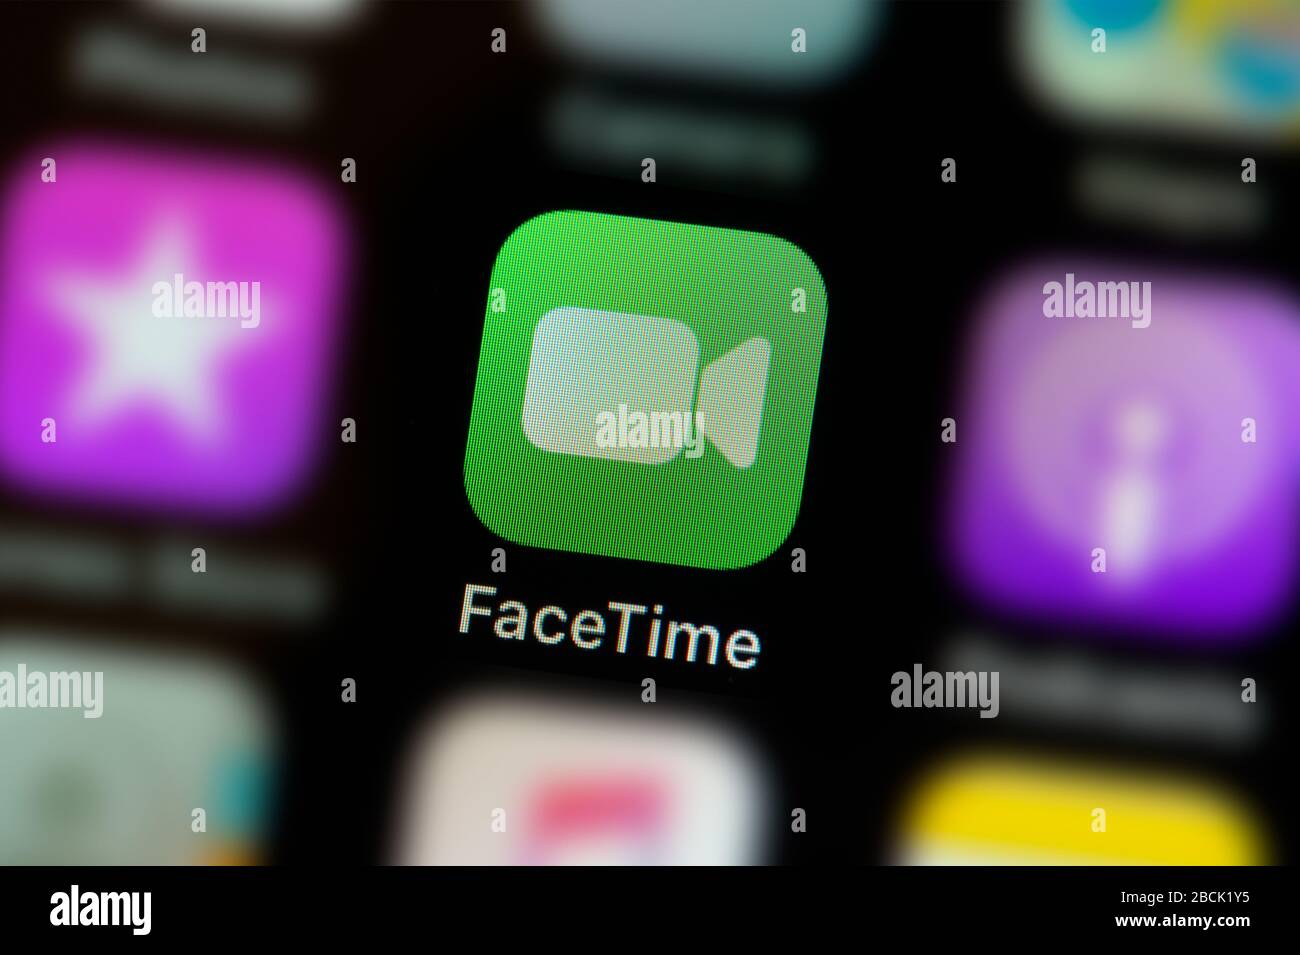 A close-up shot of the Facetime app icon, as seen on the screen of a smart phone (Editorial use only) Stock Photo